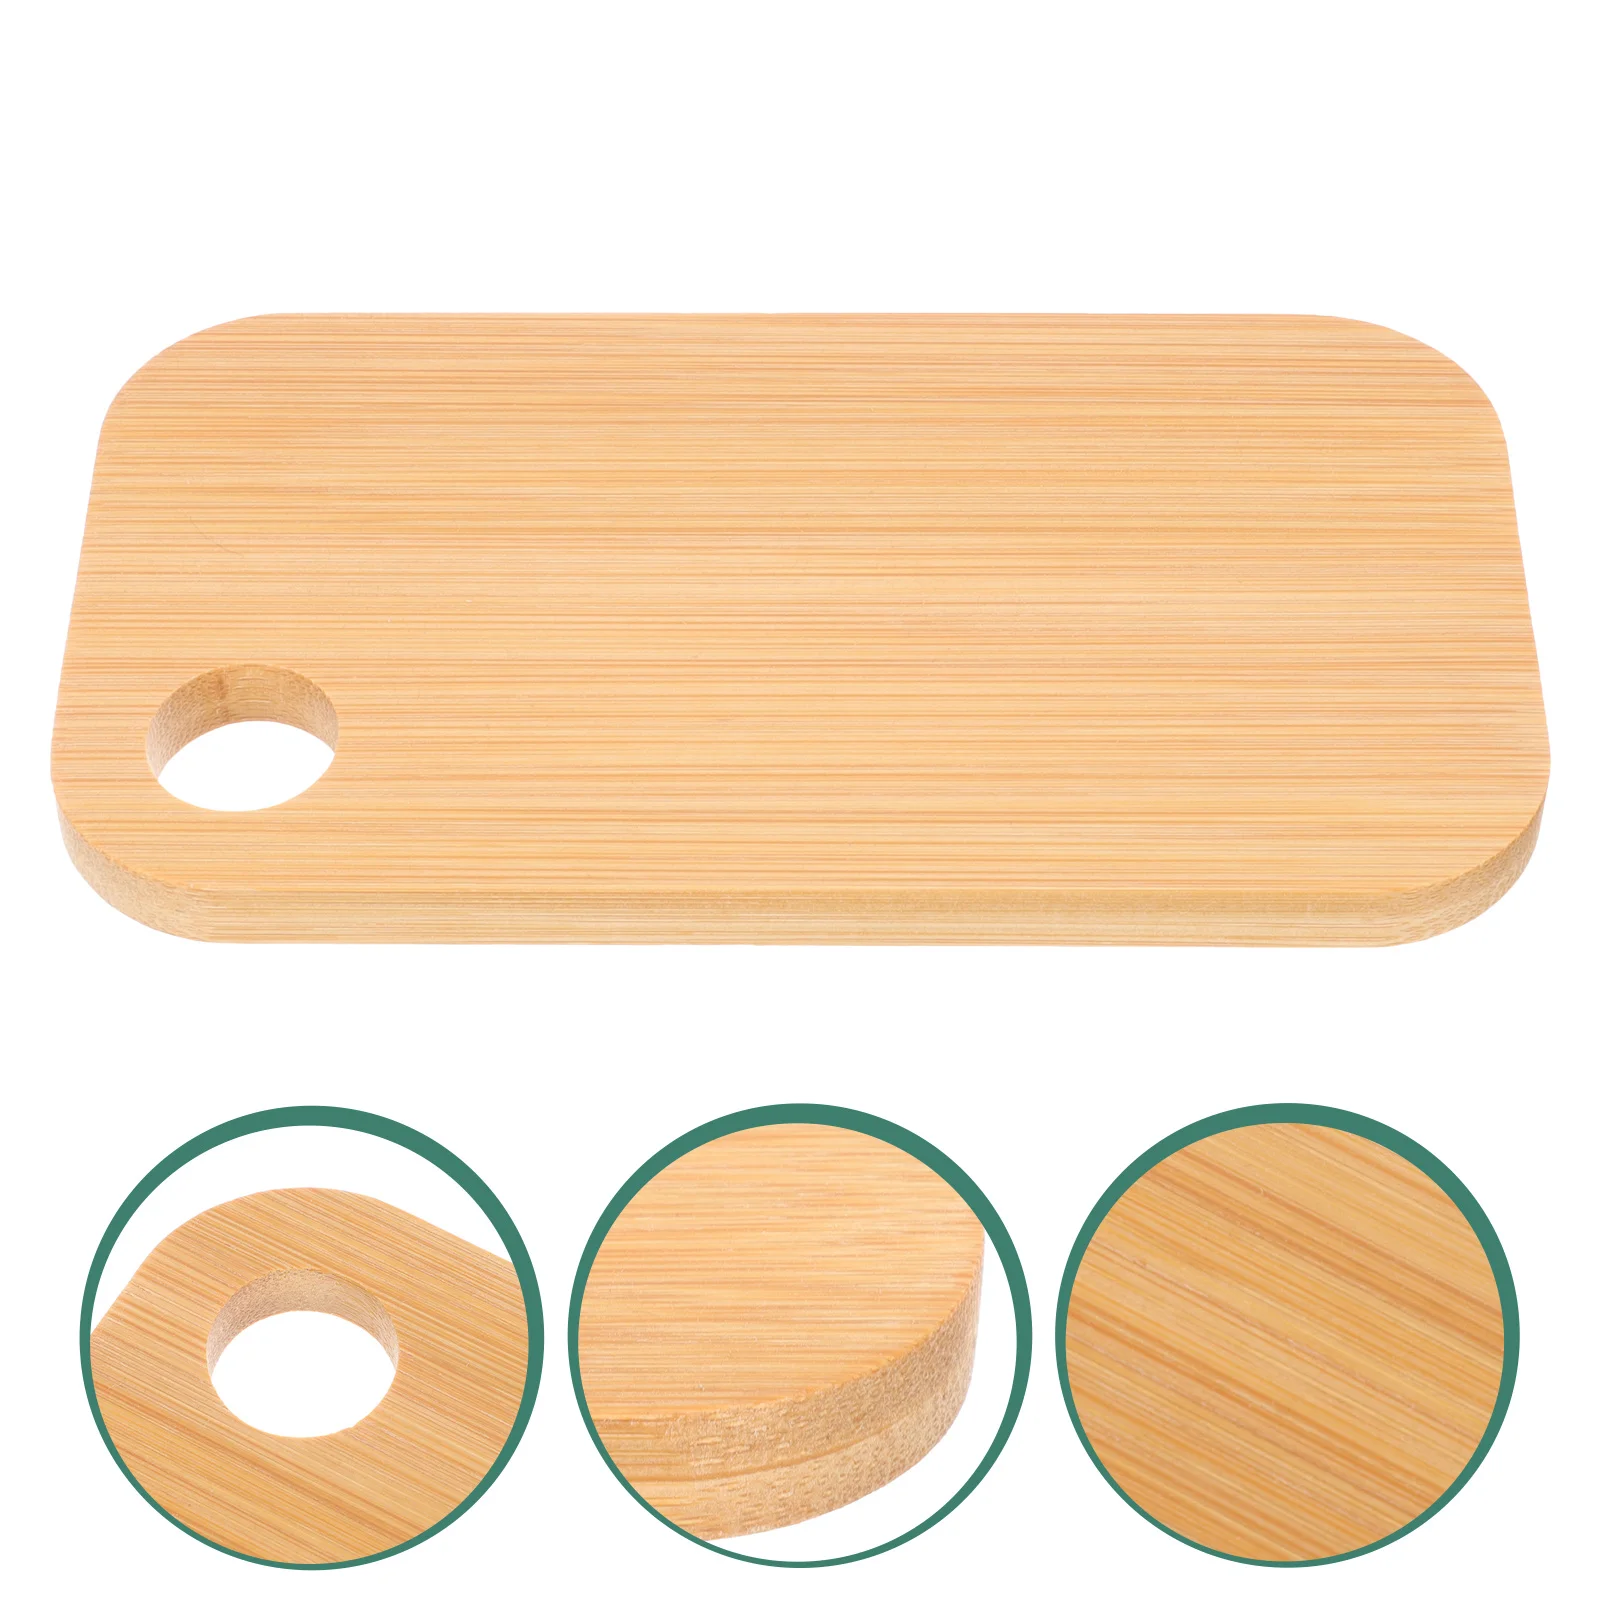 

Board Cutting Chopping Kitchen Wooden Fruit Boards Wood Picnic Vegetable Mat Platter Serving Cheese Mini Chop Block Tray